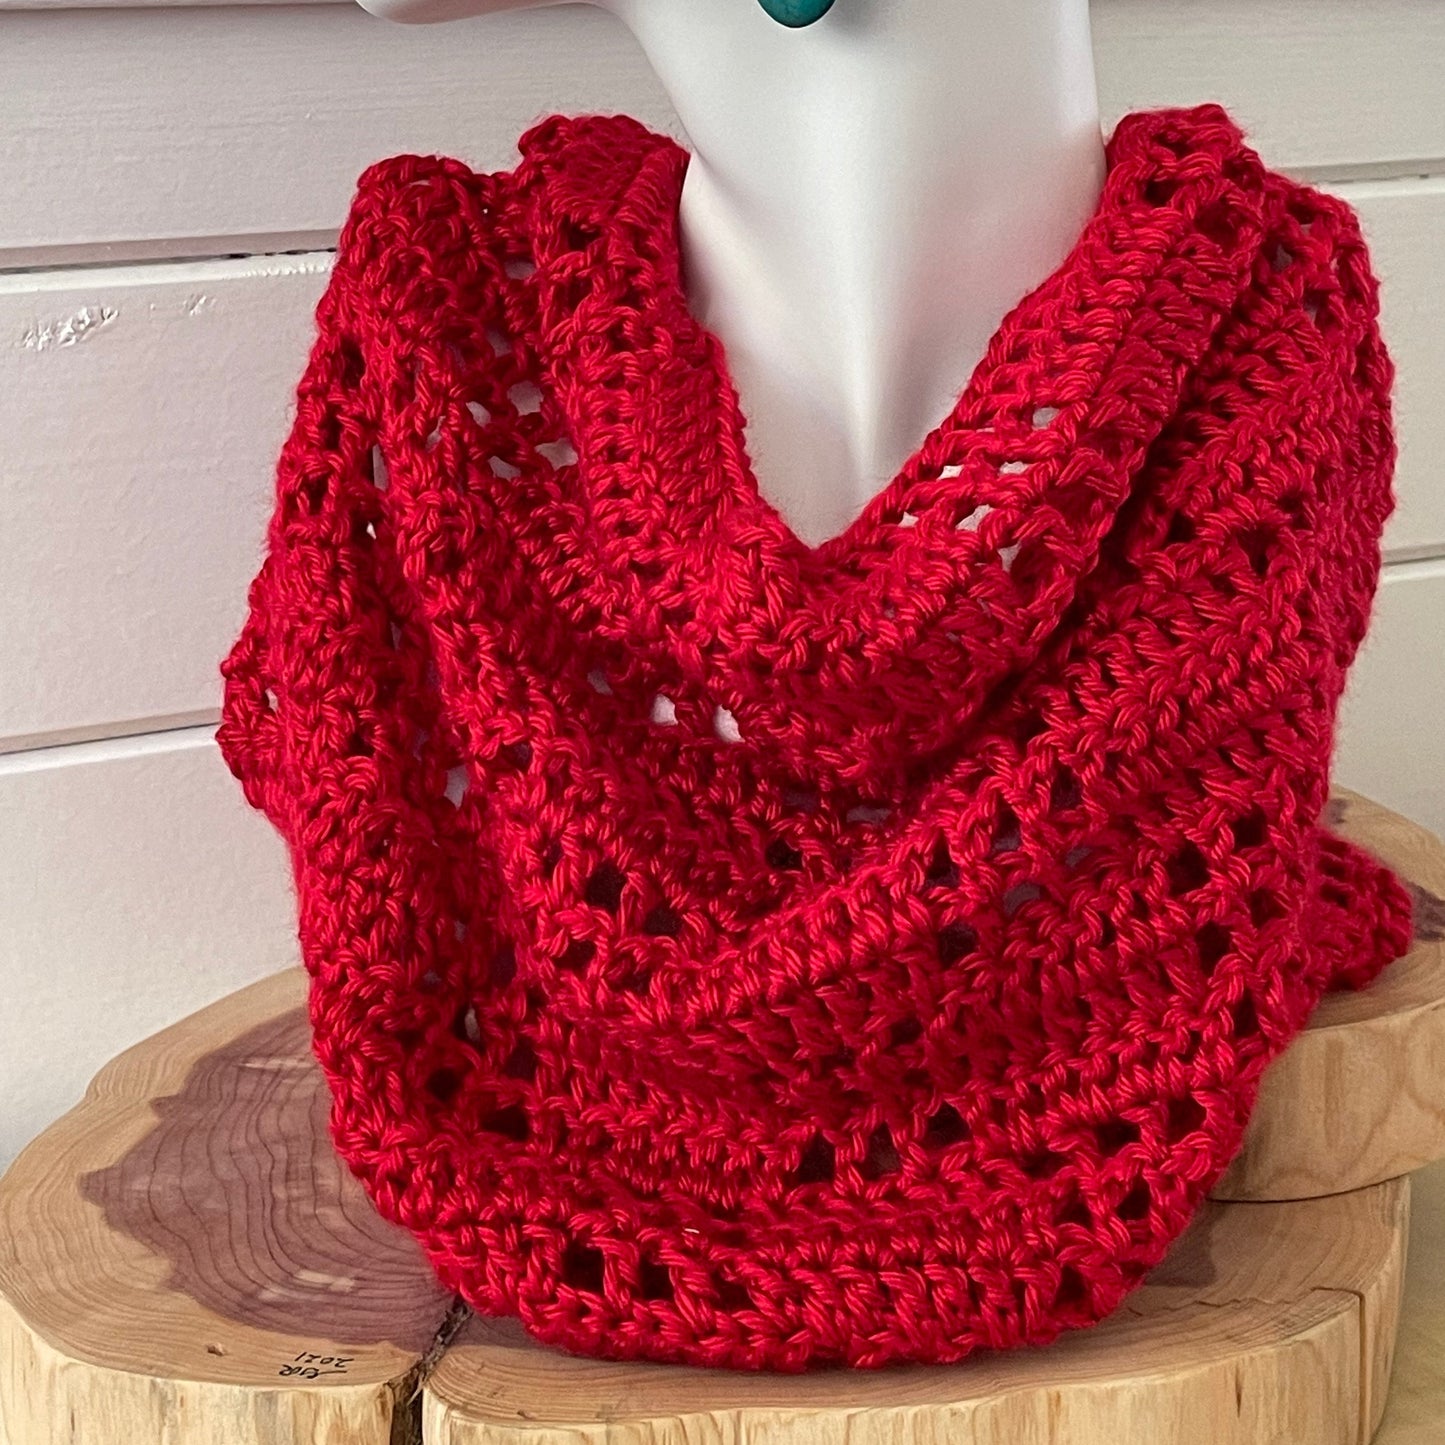 Lipstick Red Crochet Knit Cowl Scarf Extra Soft Unisex Handmade Bold Infinity Scarves Fall Winter Vintage Retro Style